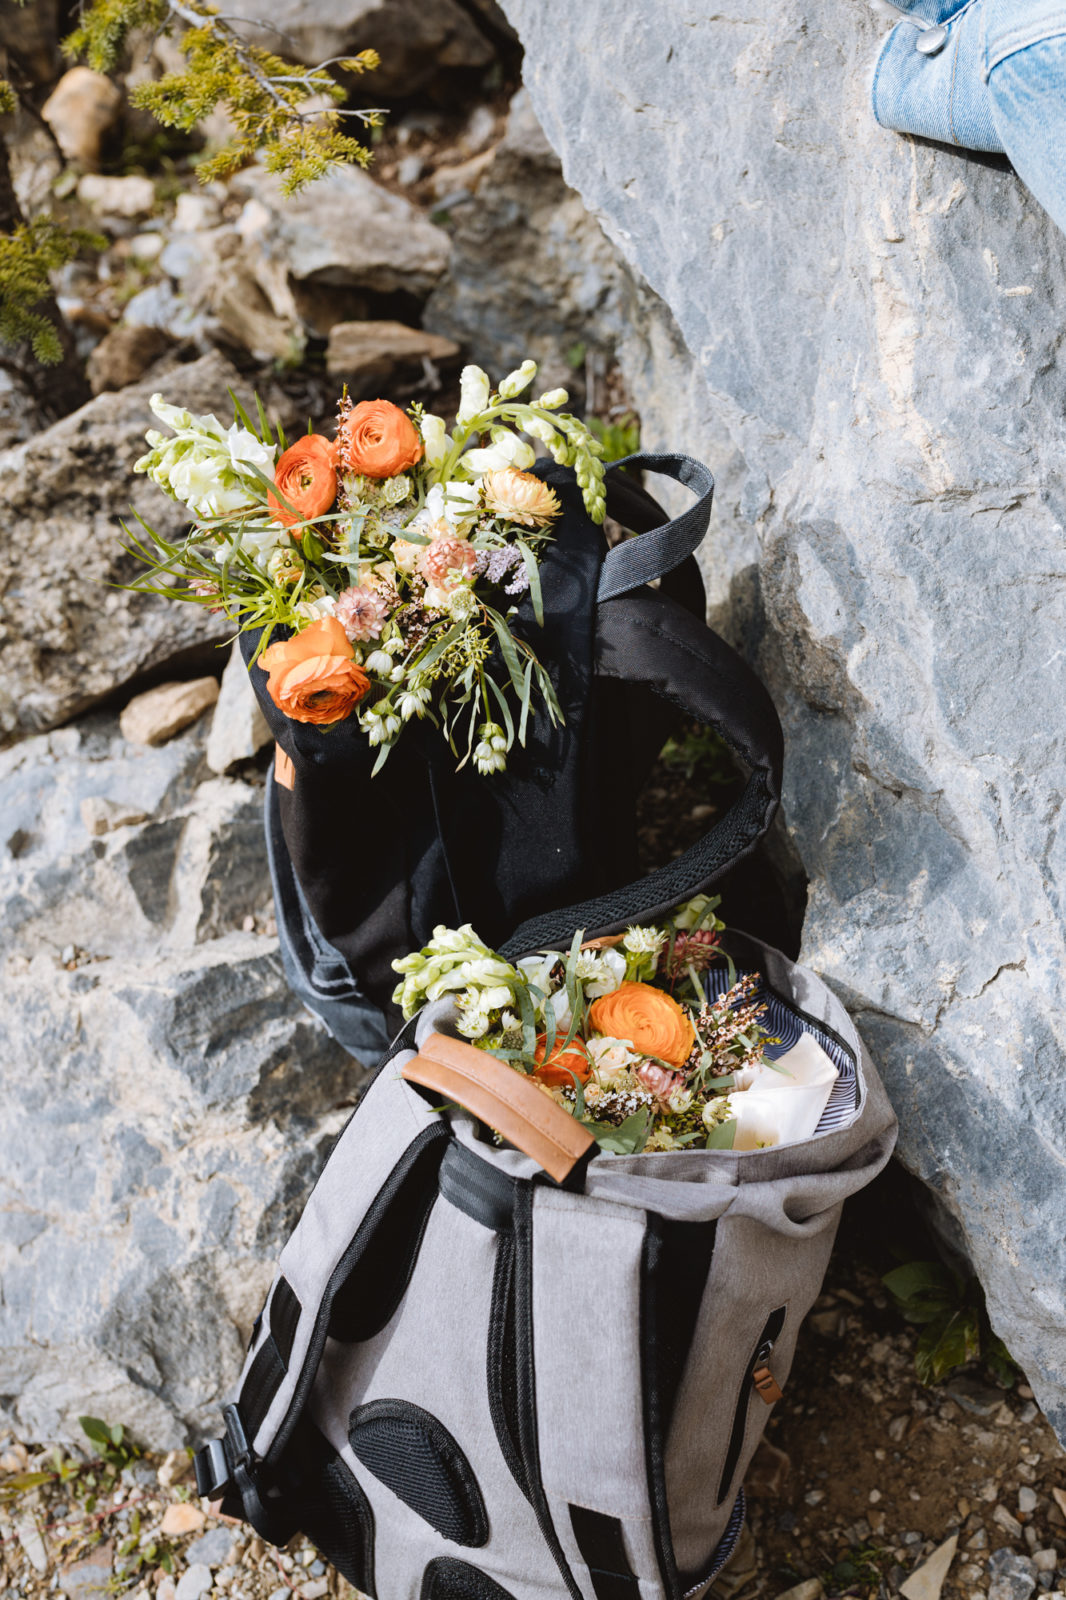 Bouquets designed by Golden Floral Co. featuring bright orange ranunculus sit on top of hiking backpacks against rocks